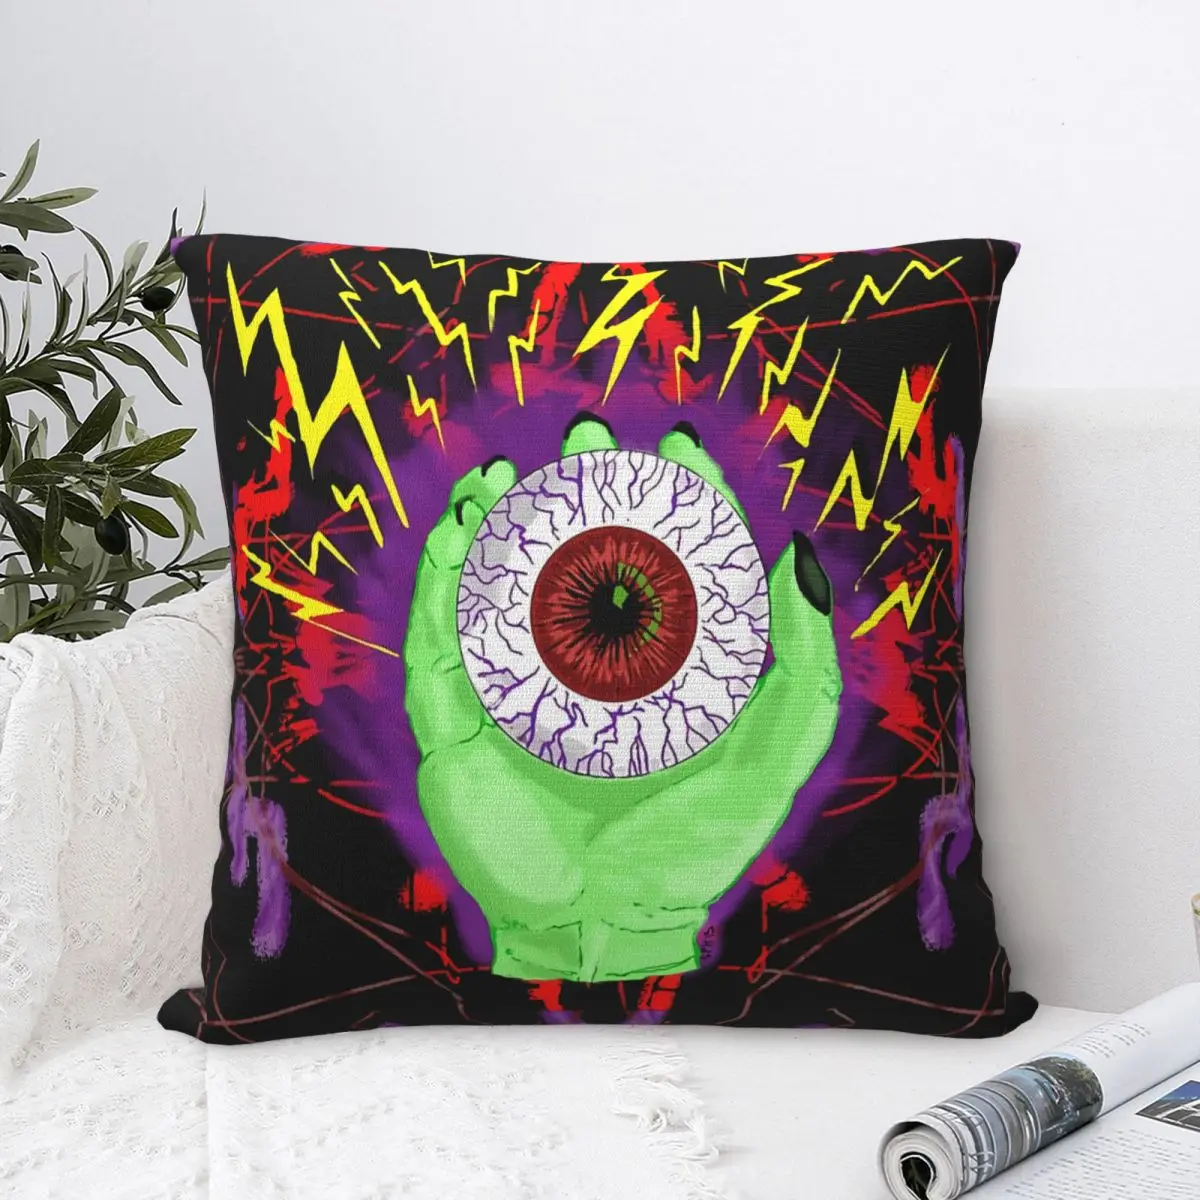 

Electric Eye Dark Art Throw Pillow Case Backpack Coussin Covers DIY Printed Fashion For Chair Decor